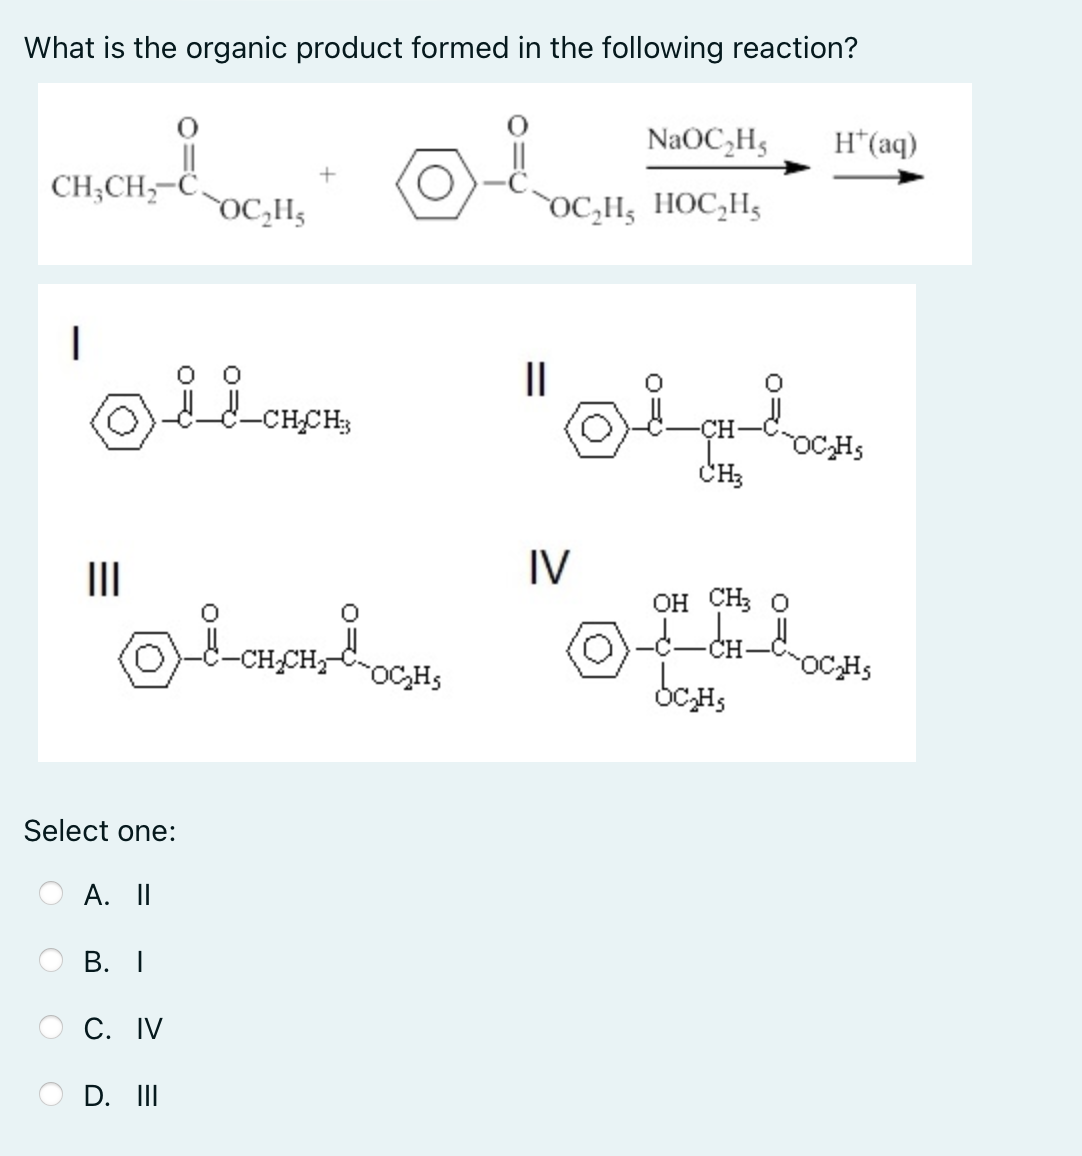 What is the organic product formed in the following reaction?
NaOC₂H₂ H+(aq)
стеносли
+
OC₂H HOC₂H
|
-CH₂CH
=
|||
Select one:
A. II
B. I
C. IV
D. III
°
-CH₂CH₂
OC₂HS
IV
-CH
OC₂H₂
CH3
OH CH3 O
OC₂H₂
bc₂Hs